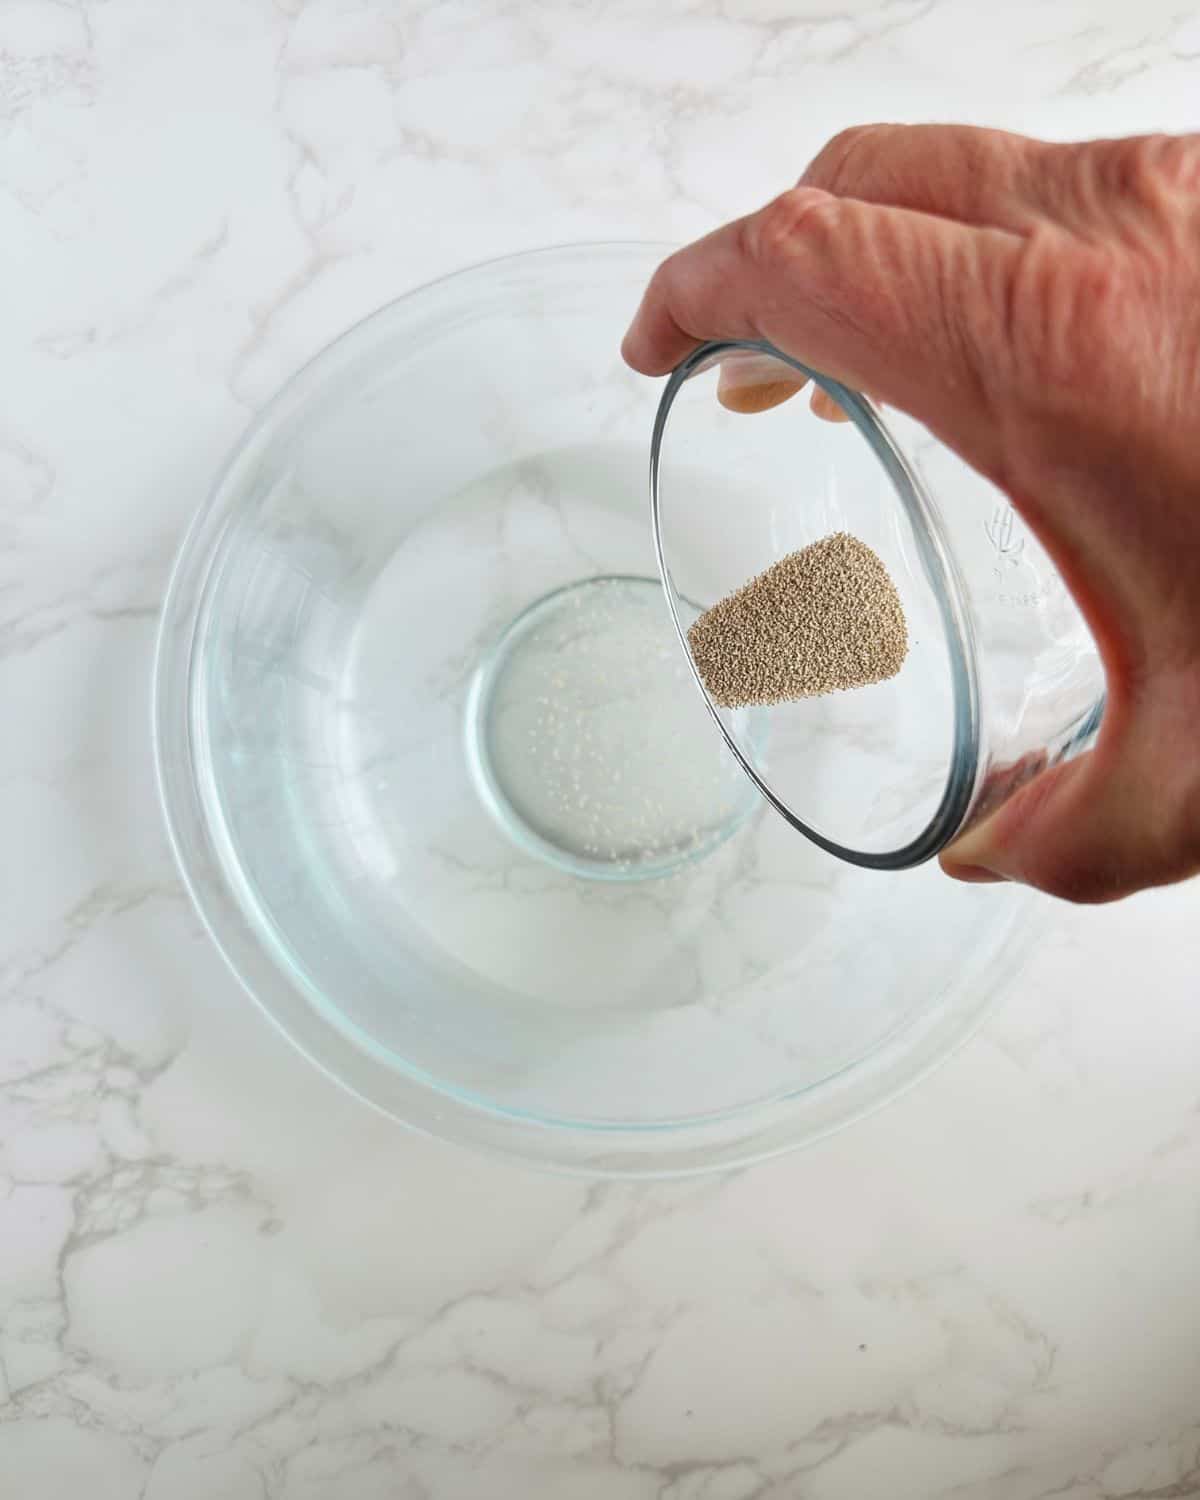 Combine the yeast into the water.